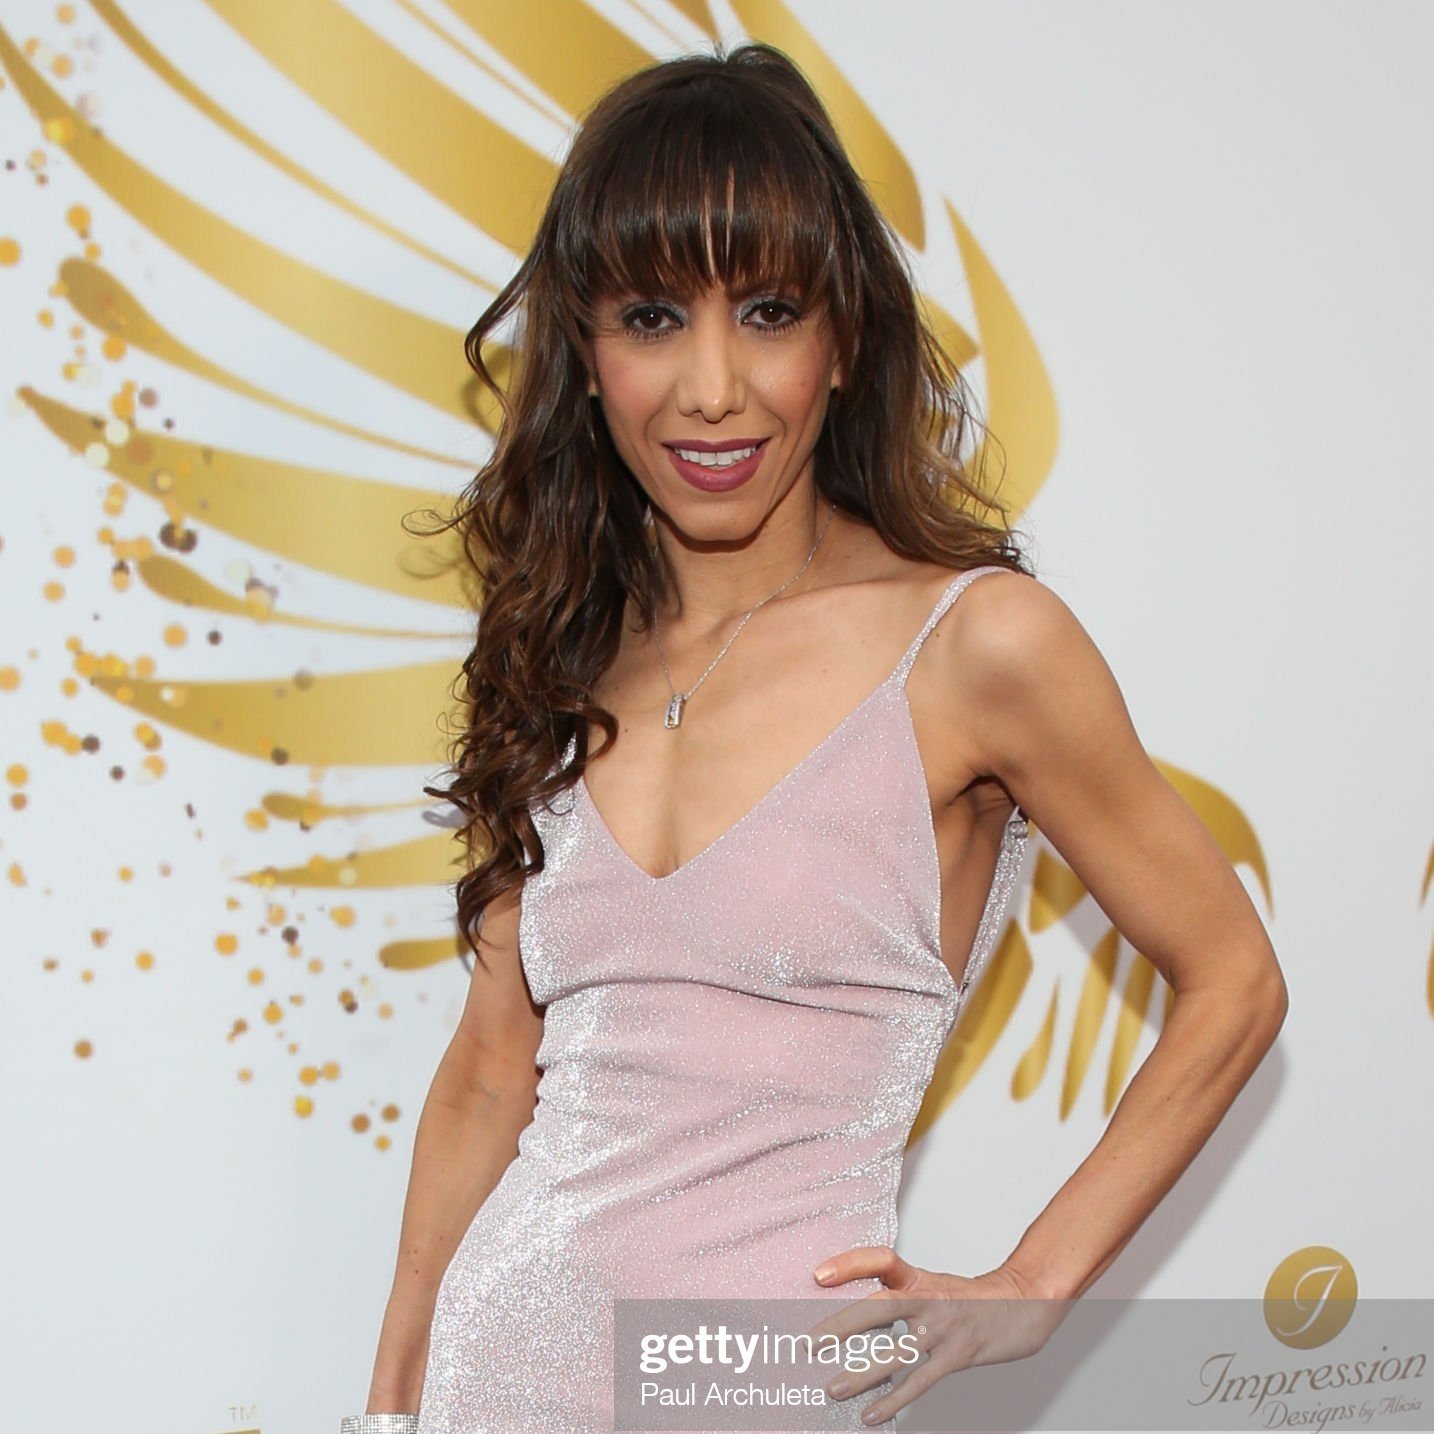 gettyimages-1371709420-2048x2048.jpg